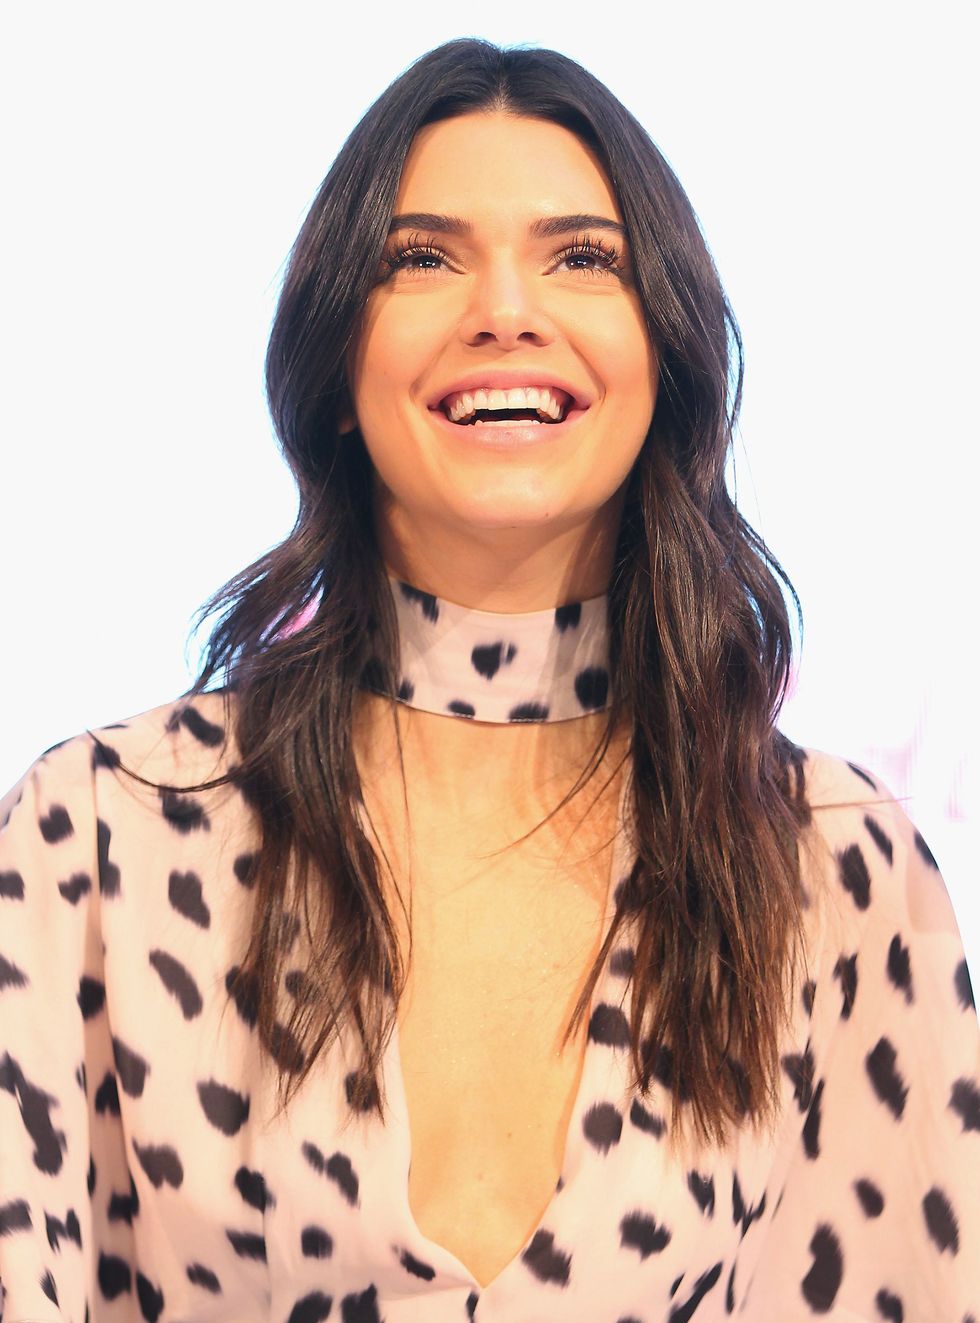 Kendall Jenner's rules for wellbeing